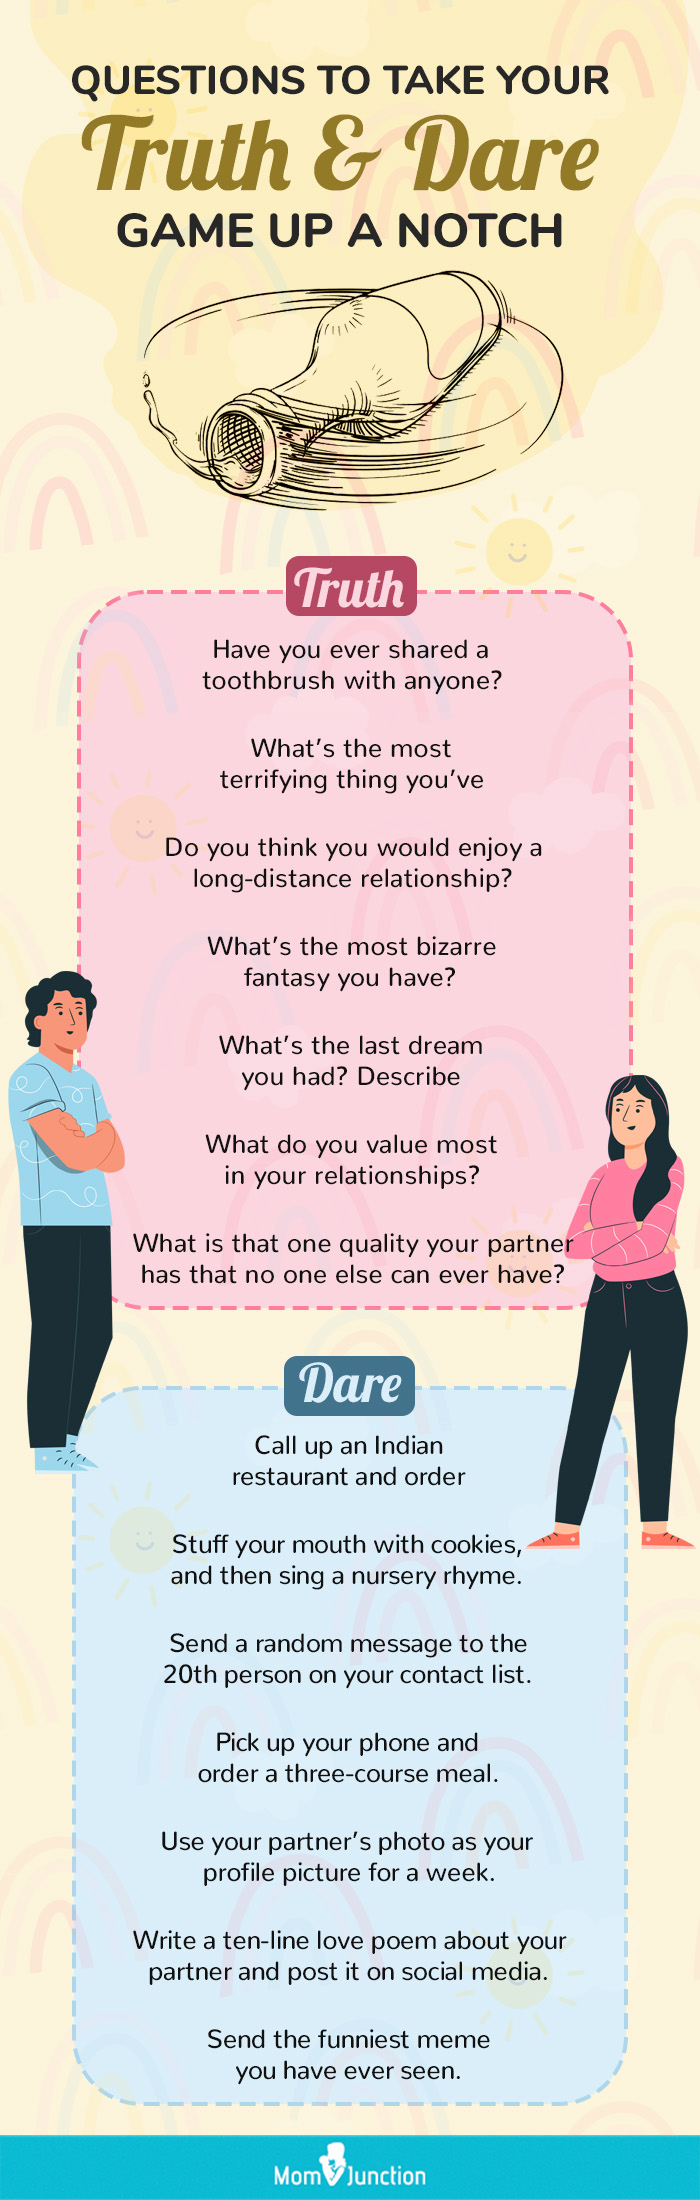 married couples play truth or dare